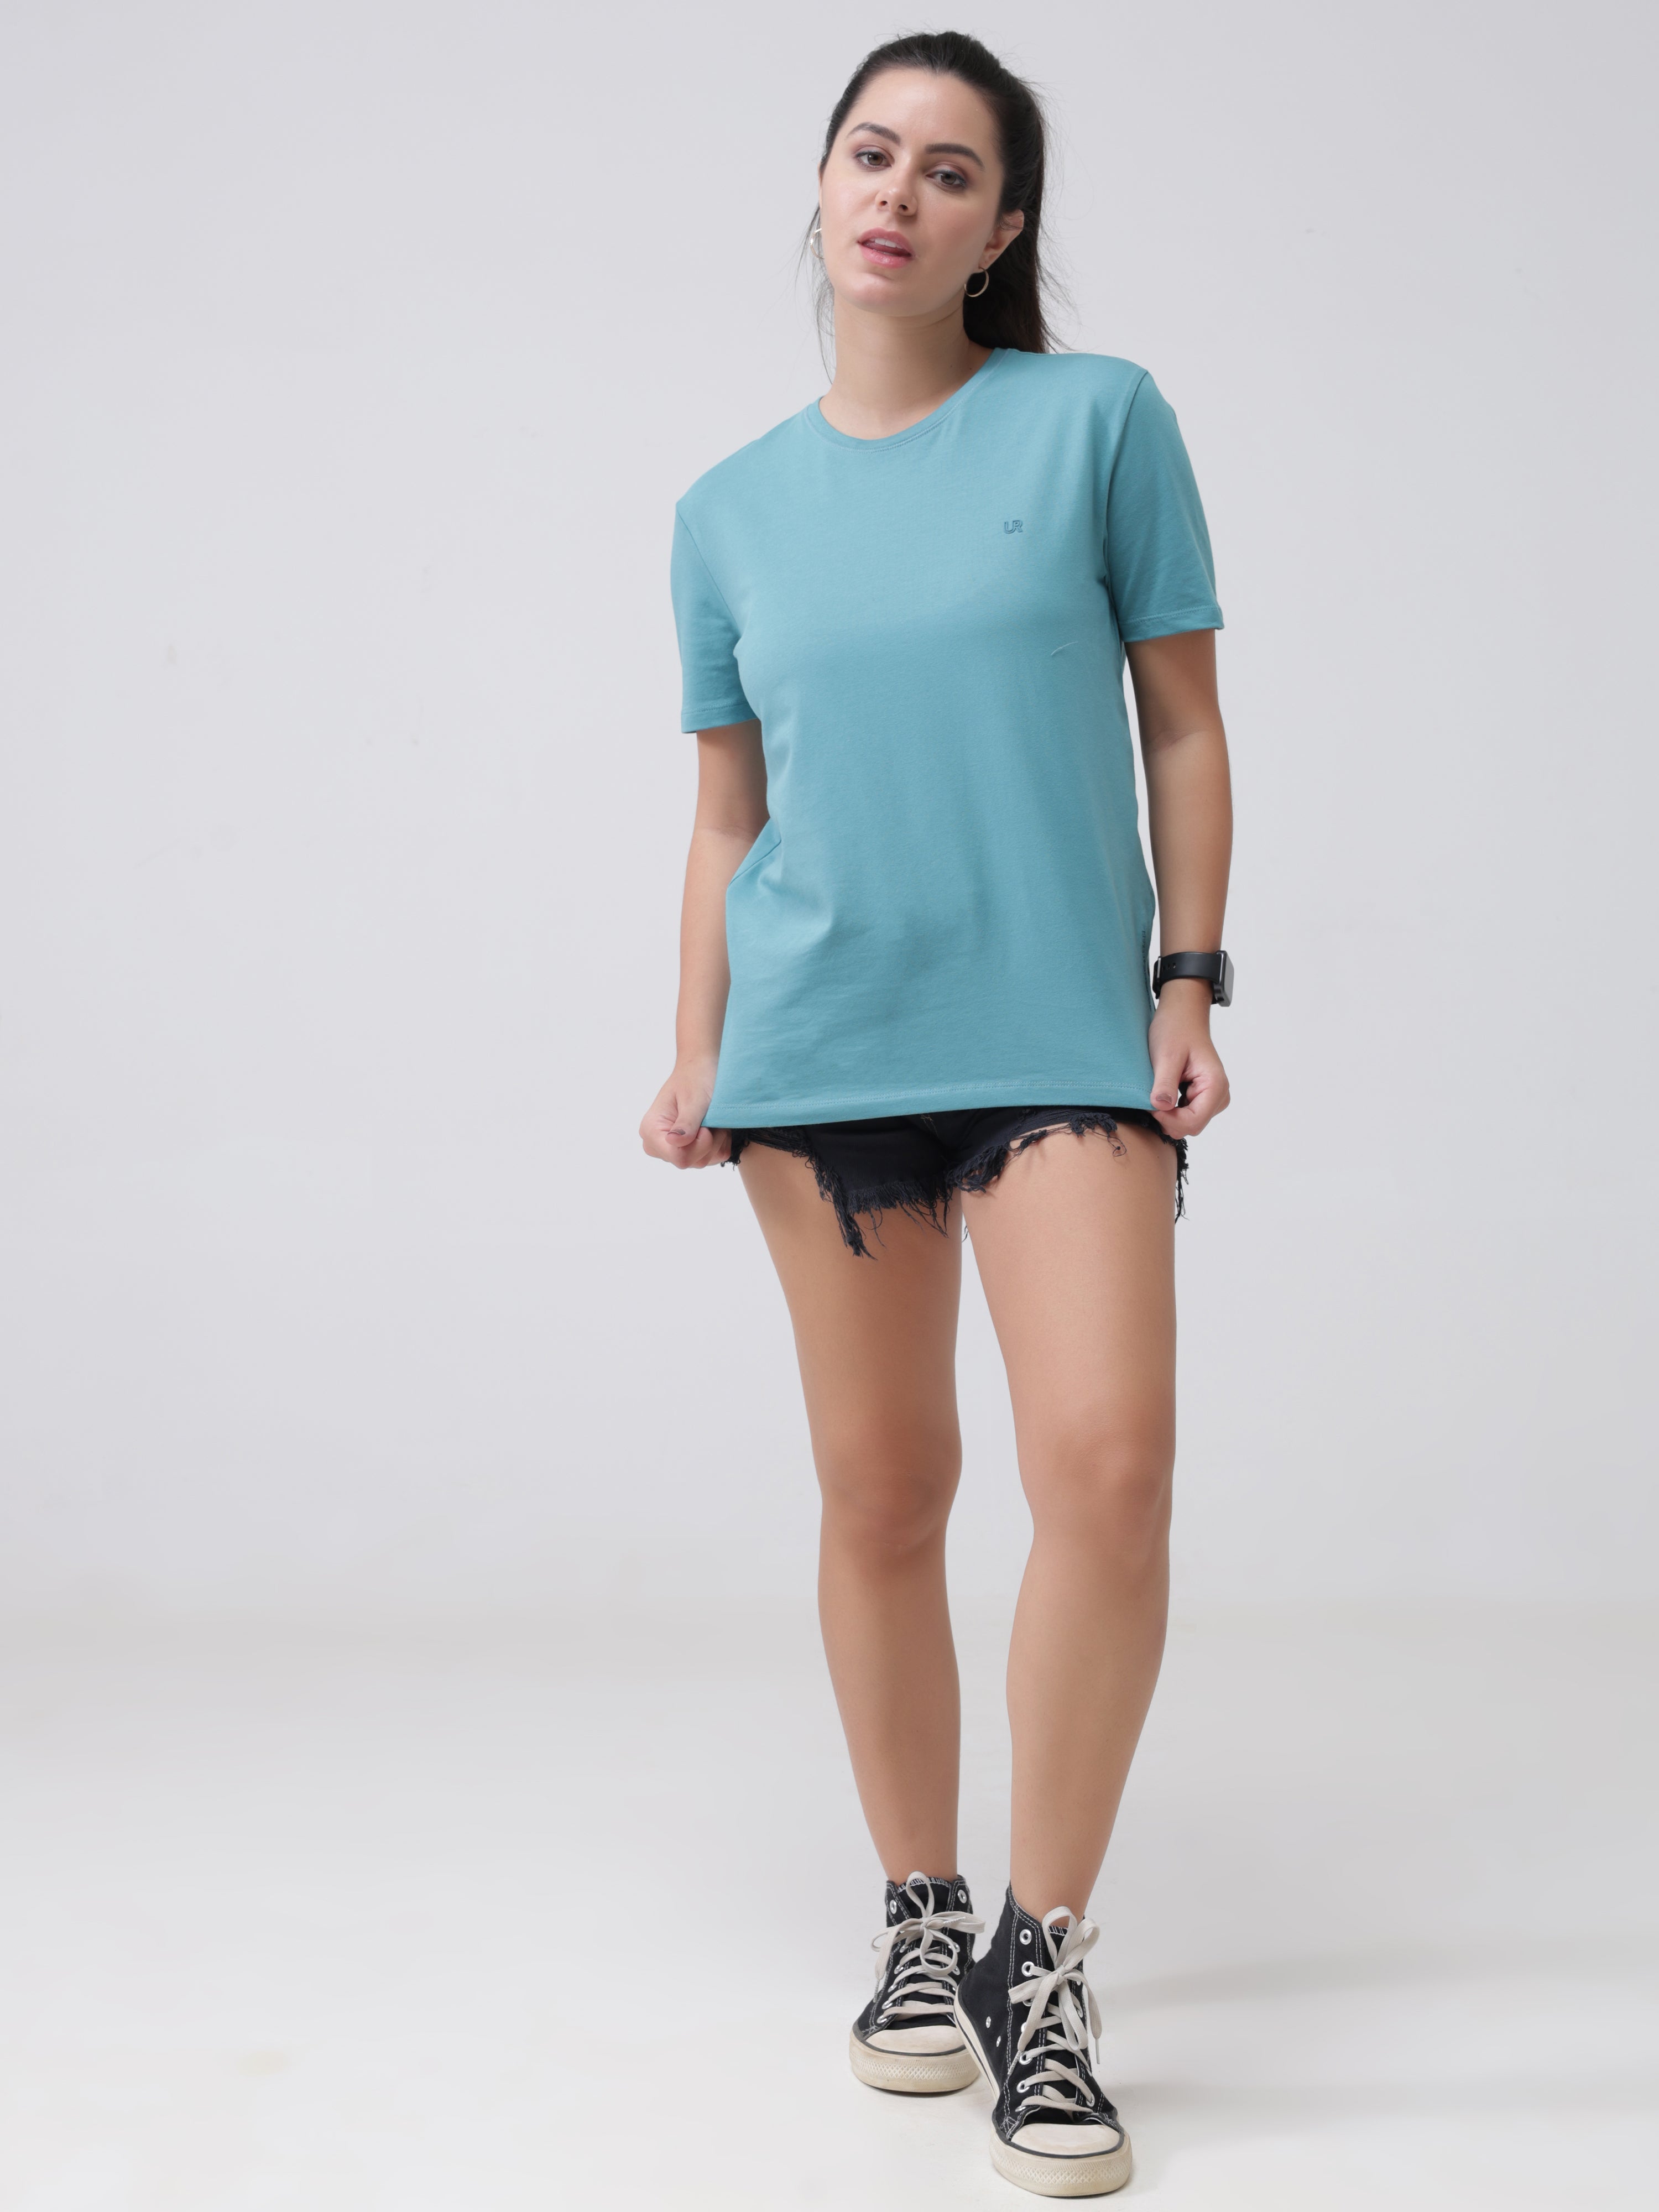 Woman wearing a round-neck turquoise Turms T-shirt with black denim shorts and sneakers, showcasing stylish and stain-proof casual apparel.